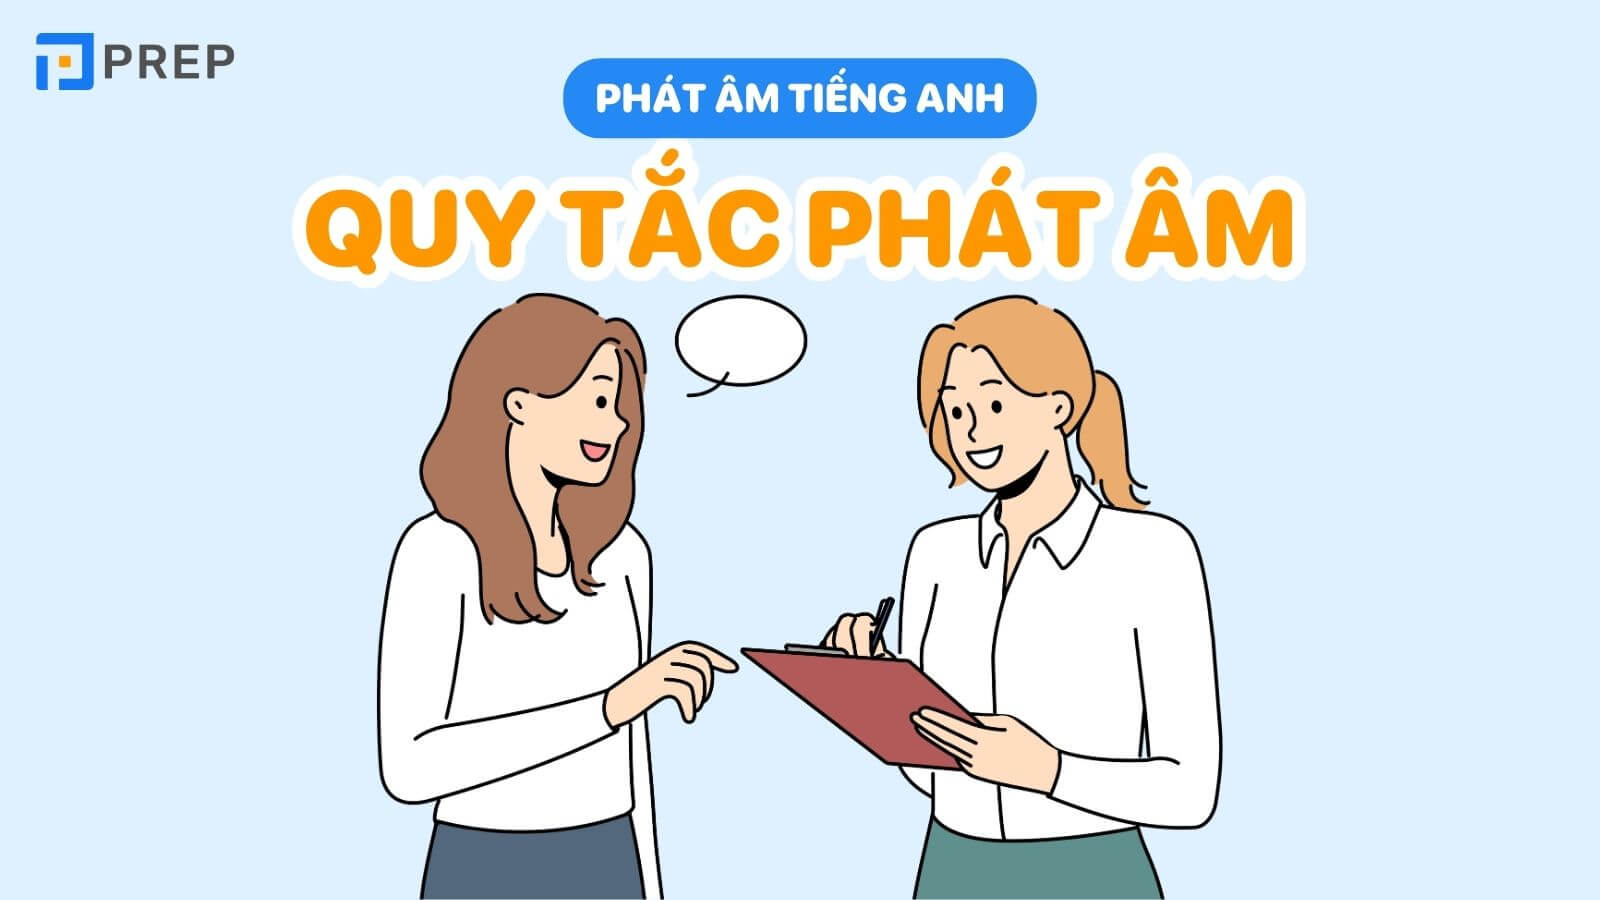 quy-tac-phat-am-tieng-anh.jpg